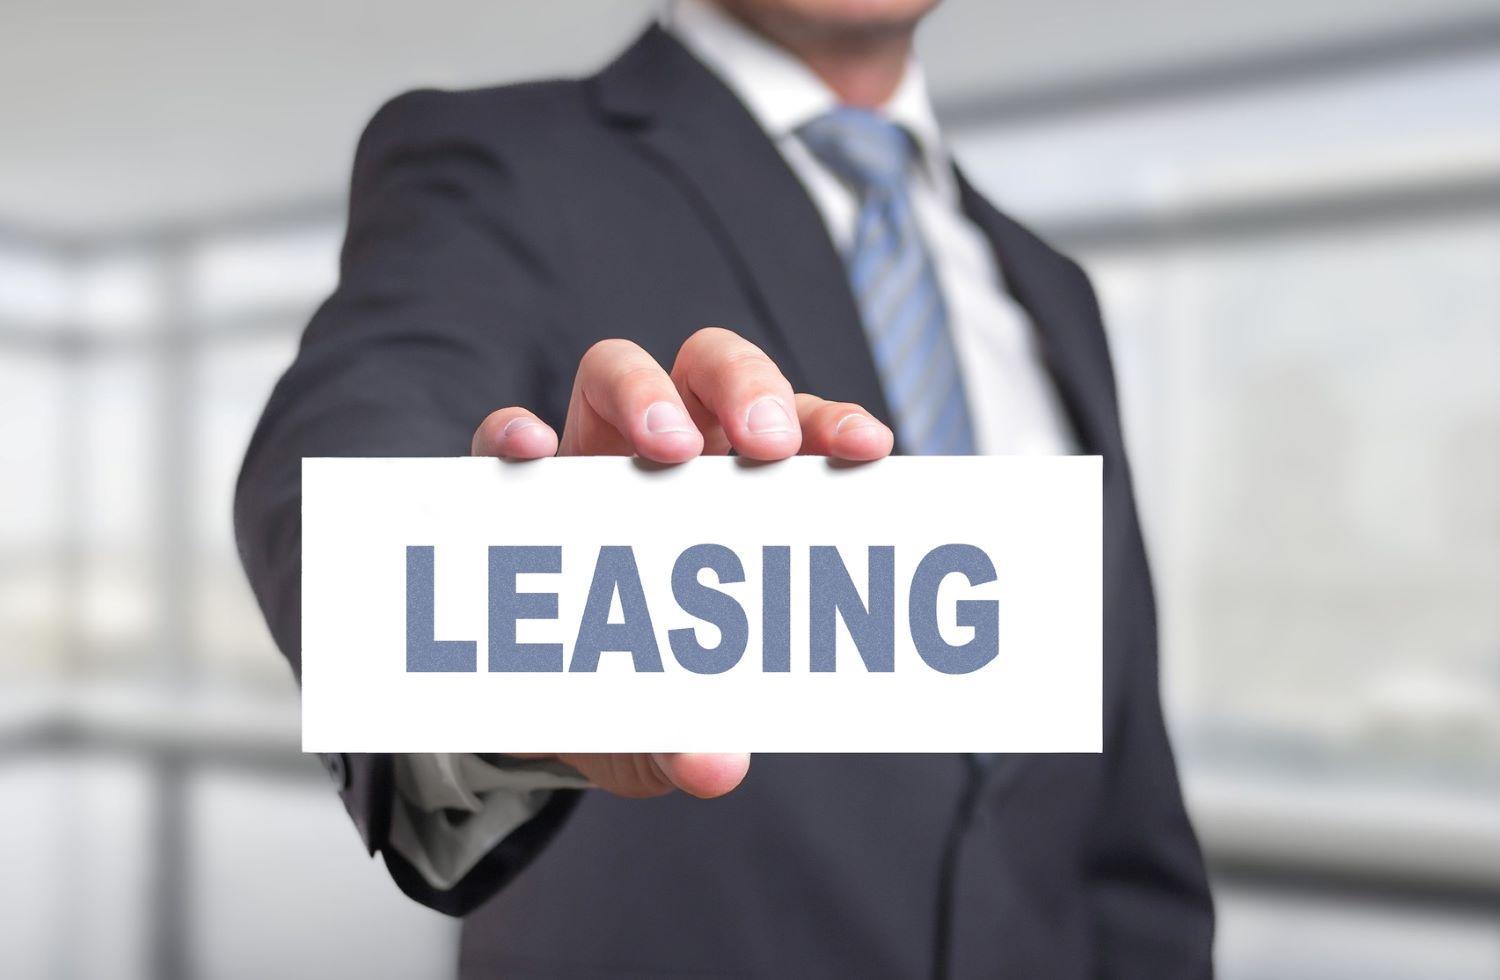 Man holding leasing sign